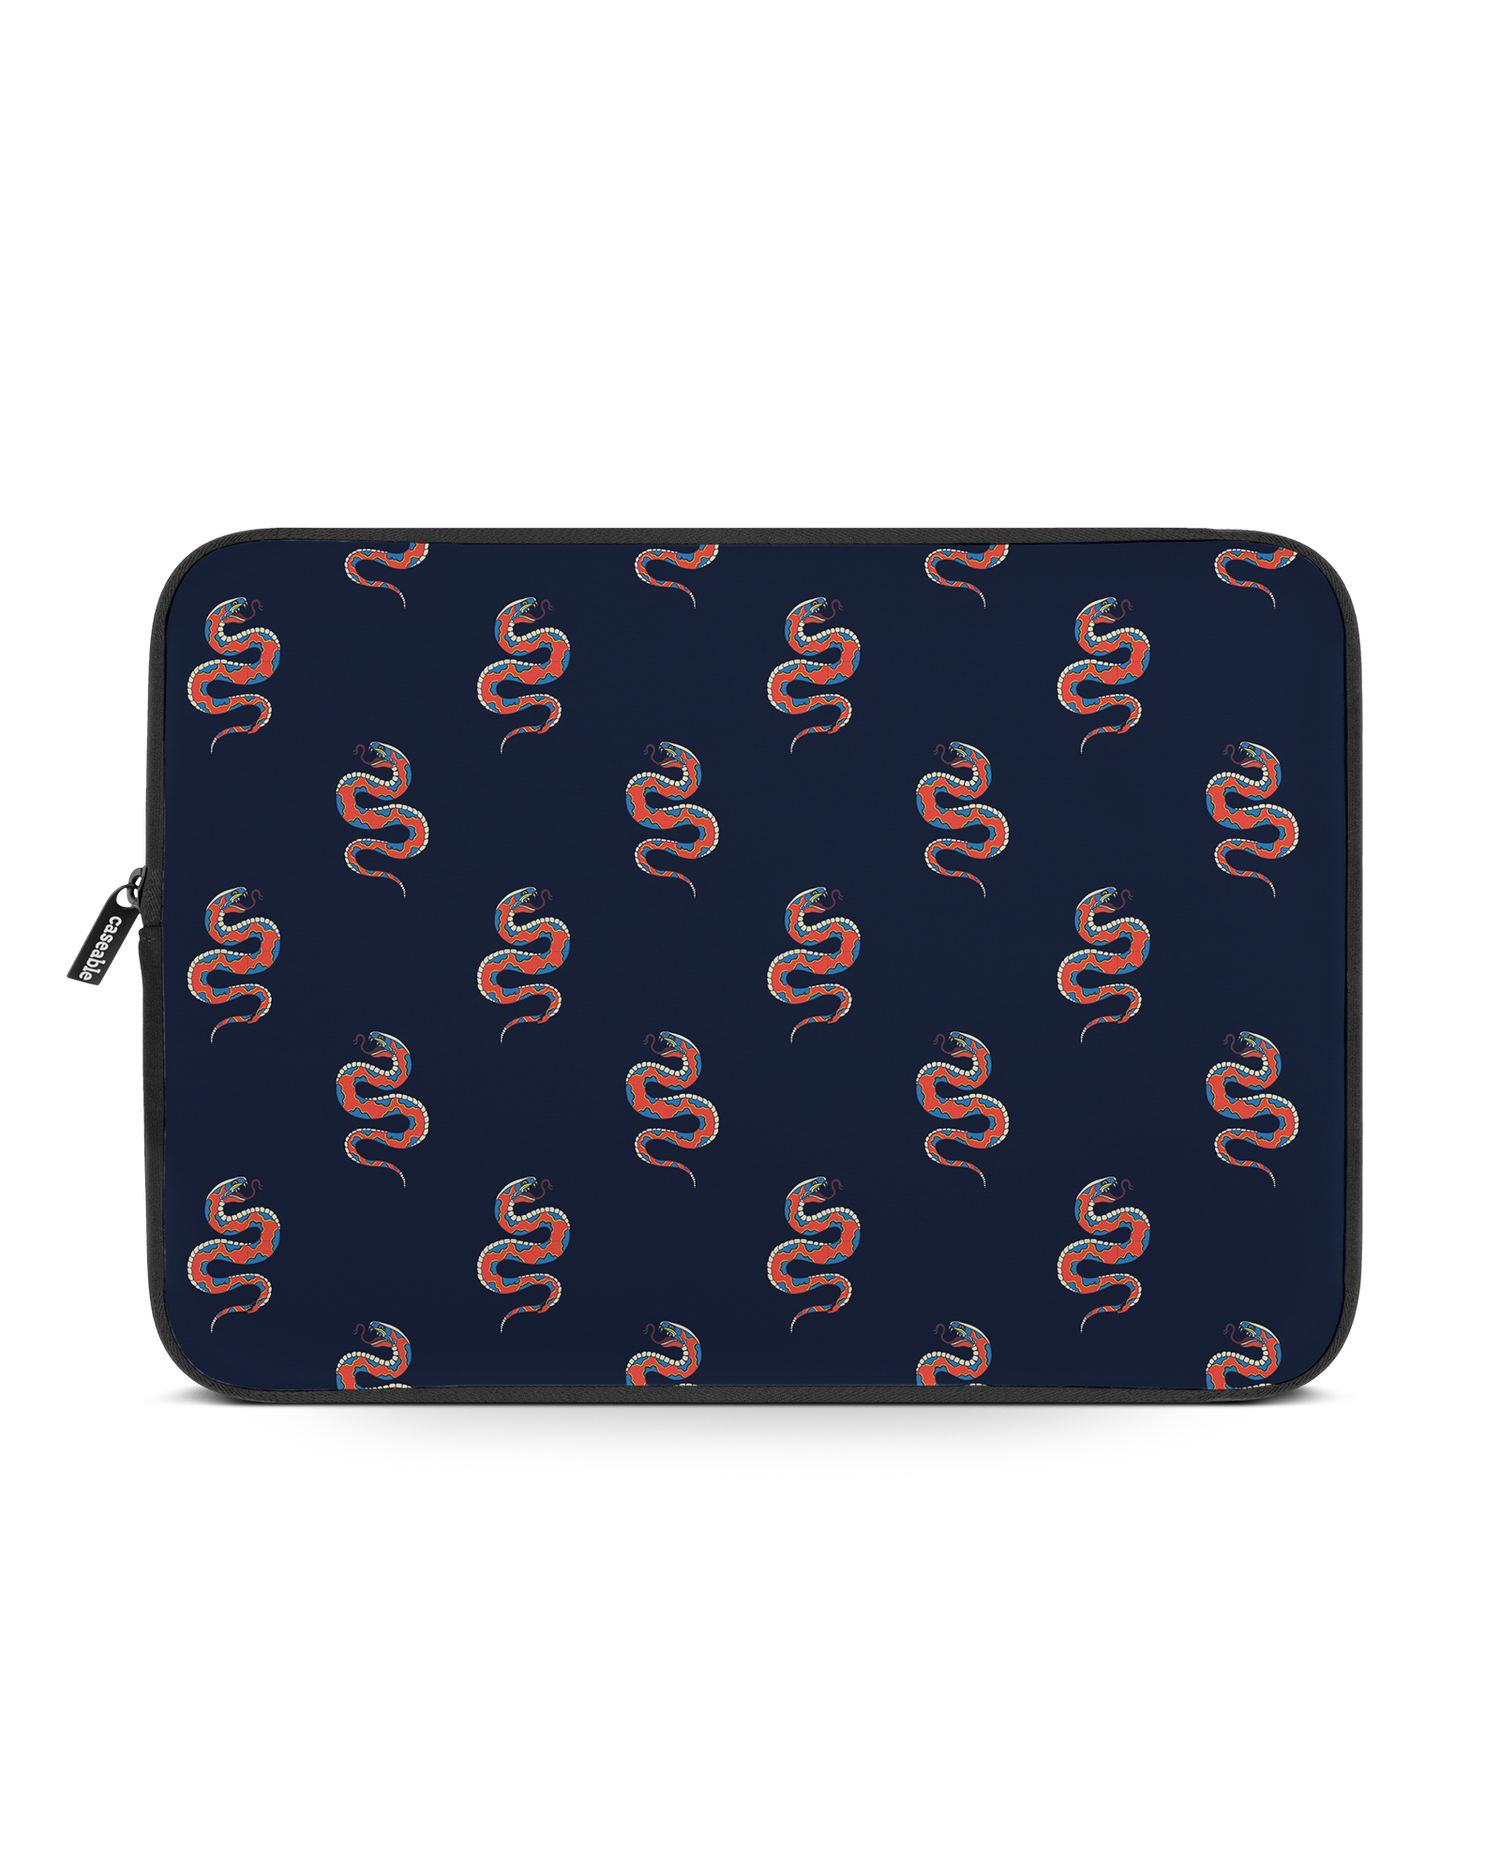 Repeating Snakes Laptop Case 14-15 inch: Front View